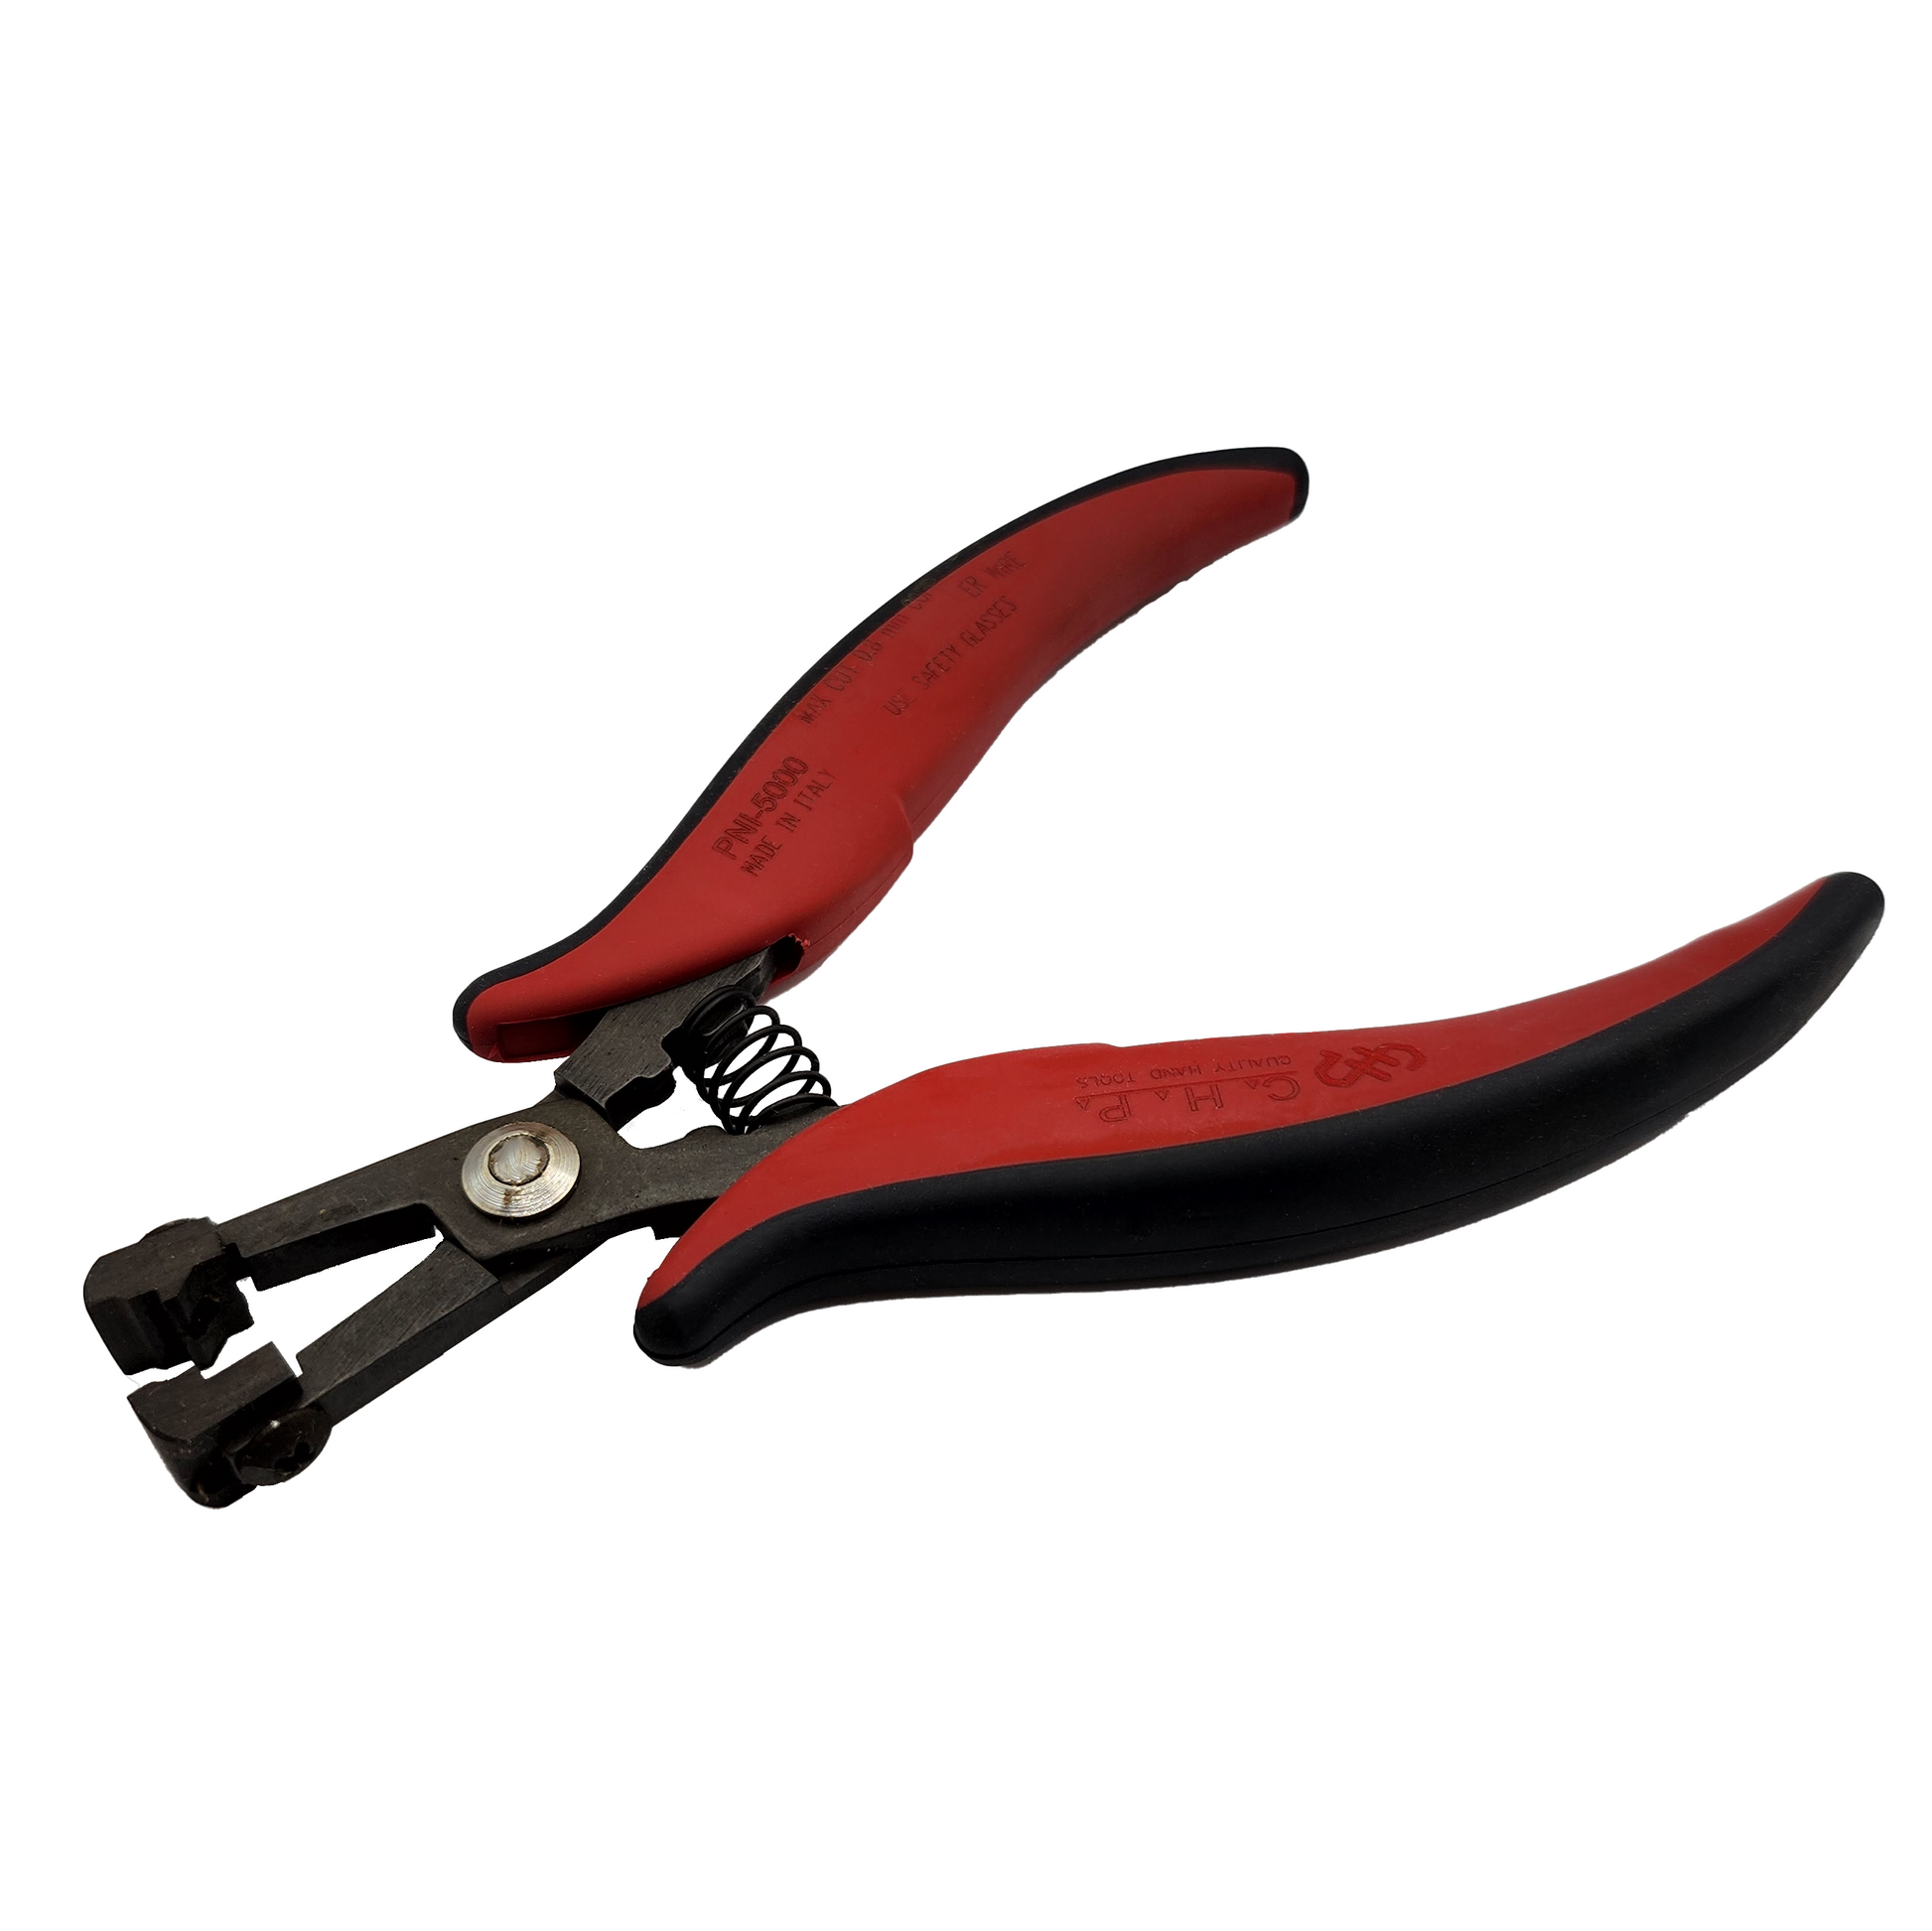 CHP_ CHP PNI-5000 Lead Forming Tool_ Cutters, Pliers, Multi-Tools_ Hakko Products